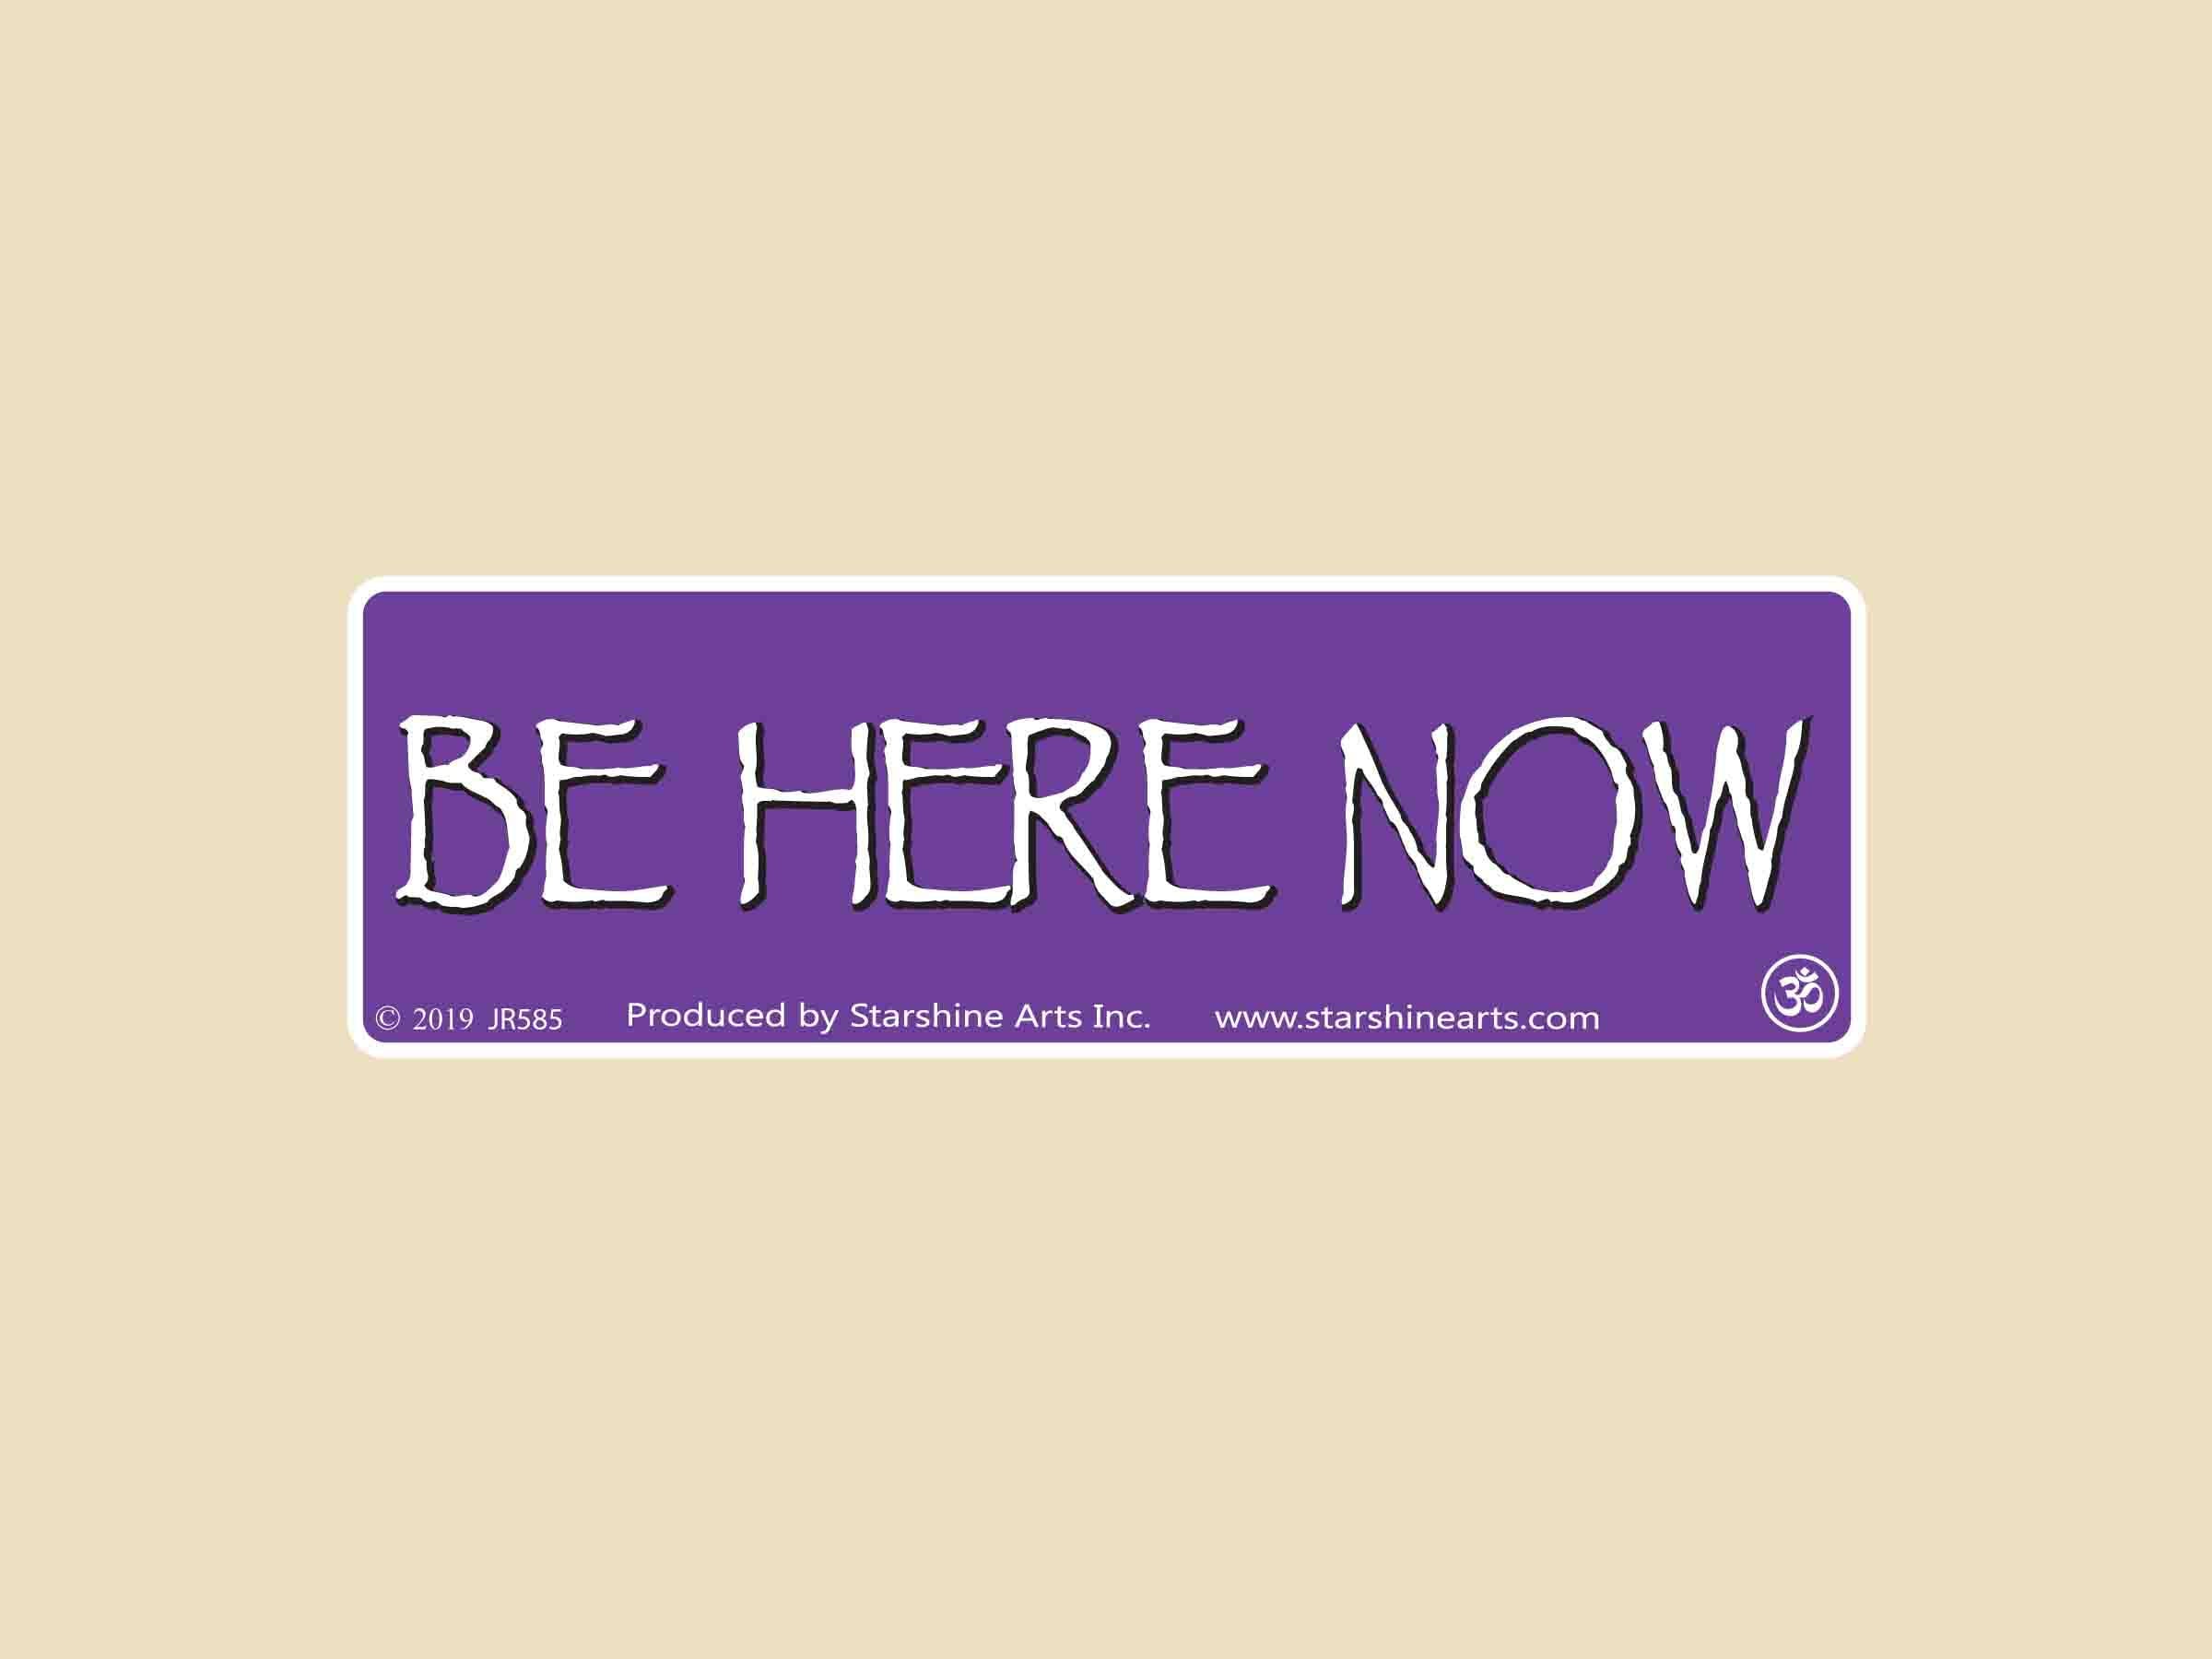 Be Here Now Small Or Large Bumper Sticker - Car Sticker, Laptop Vinyl Decal, Ram Dass